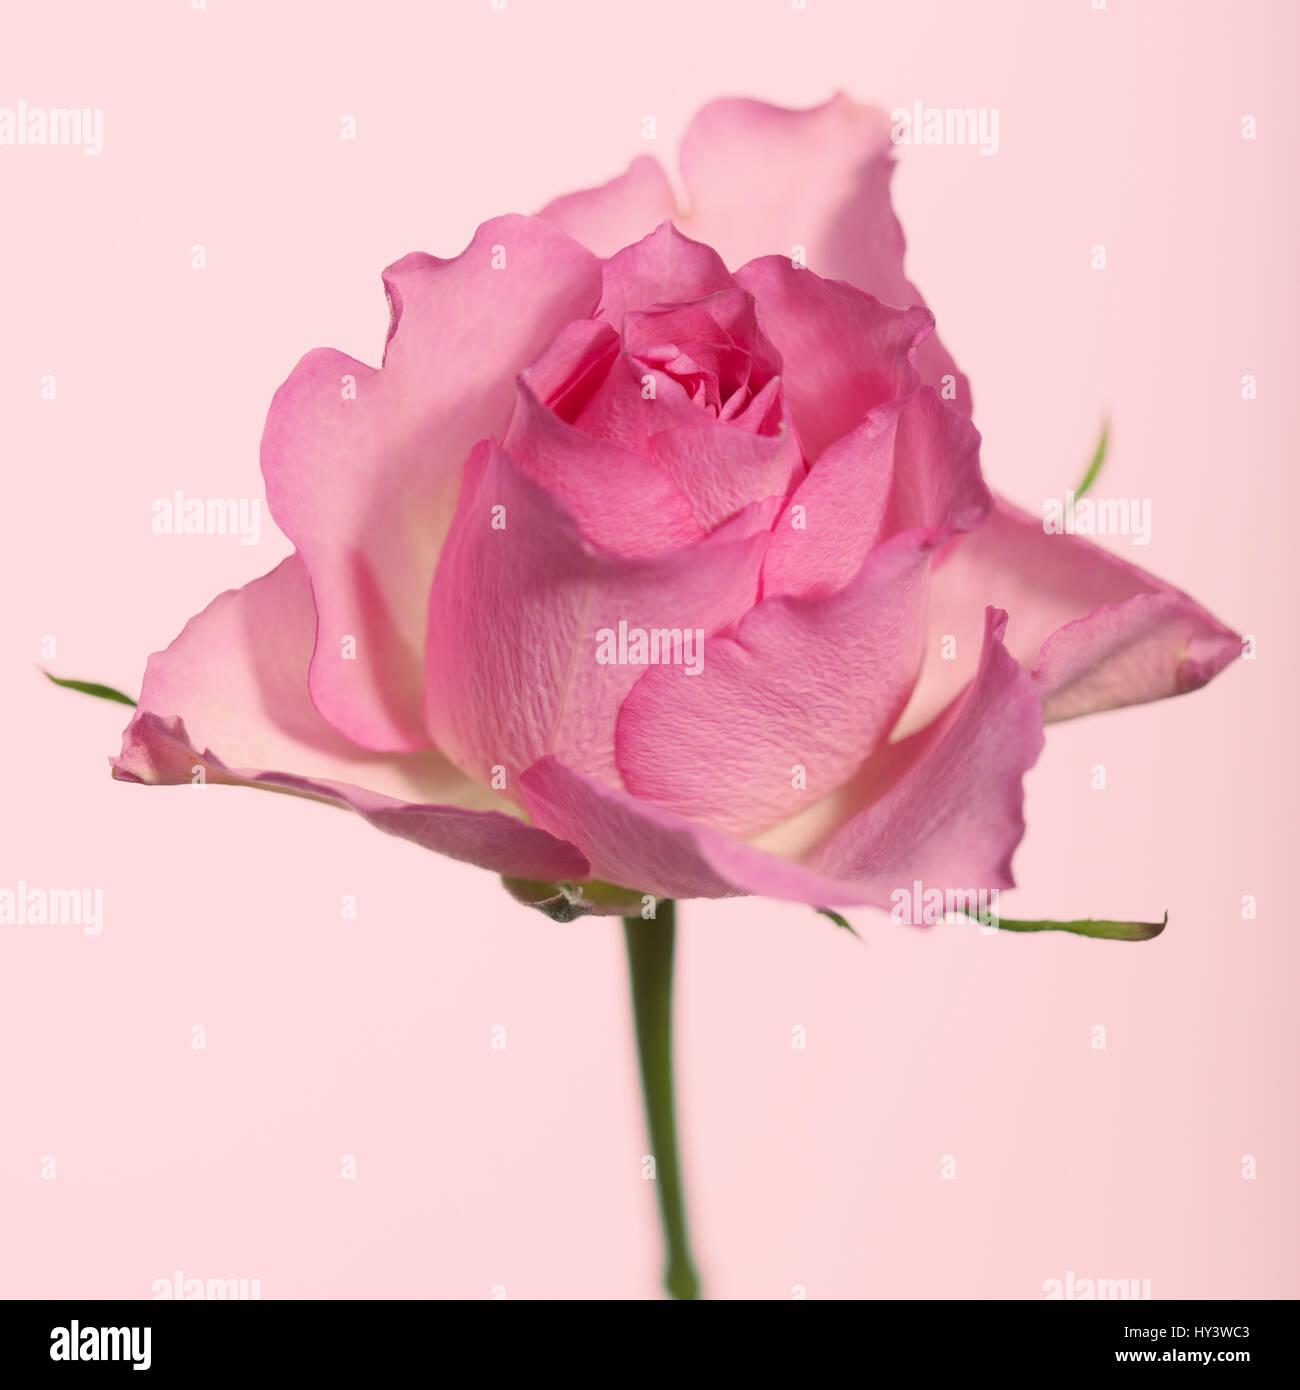 Pink rose on a plain background Stock Photo